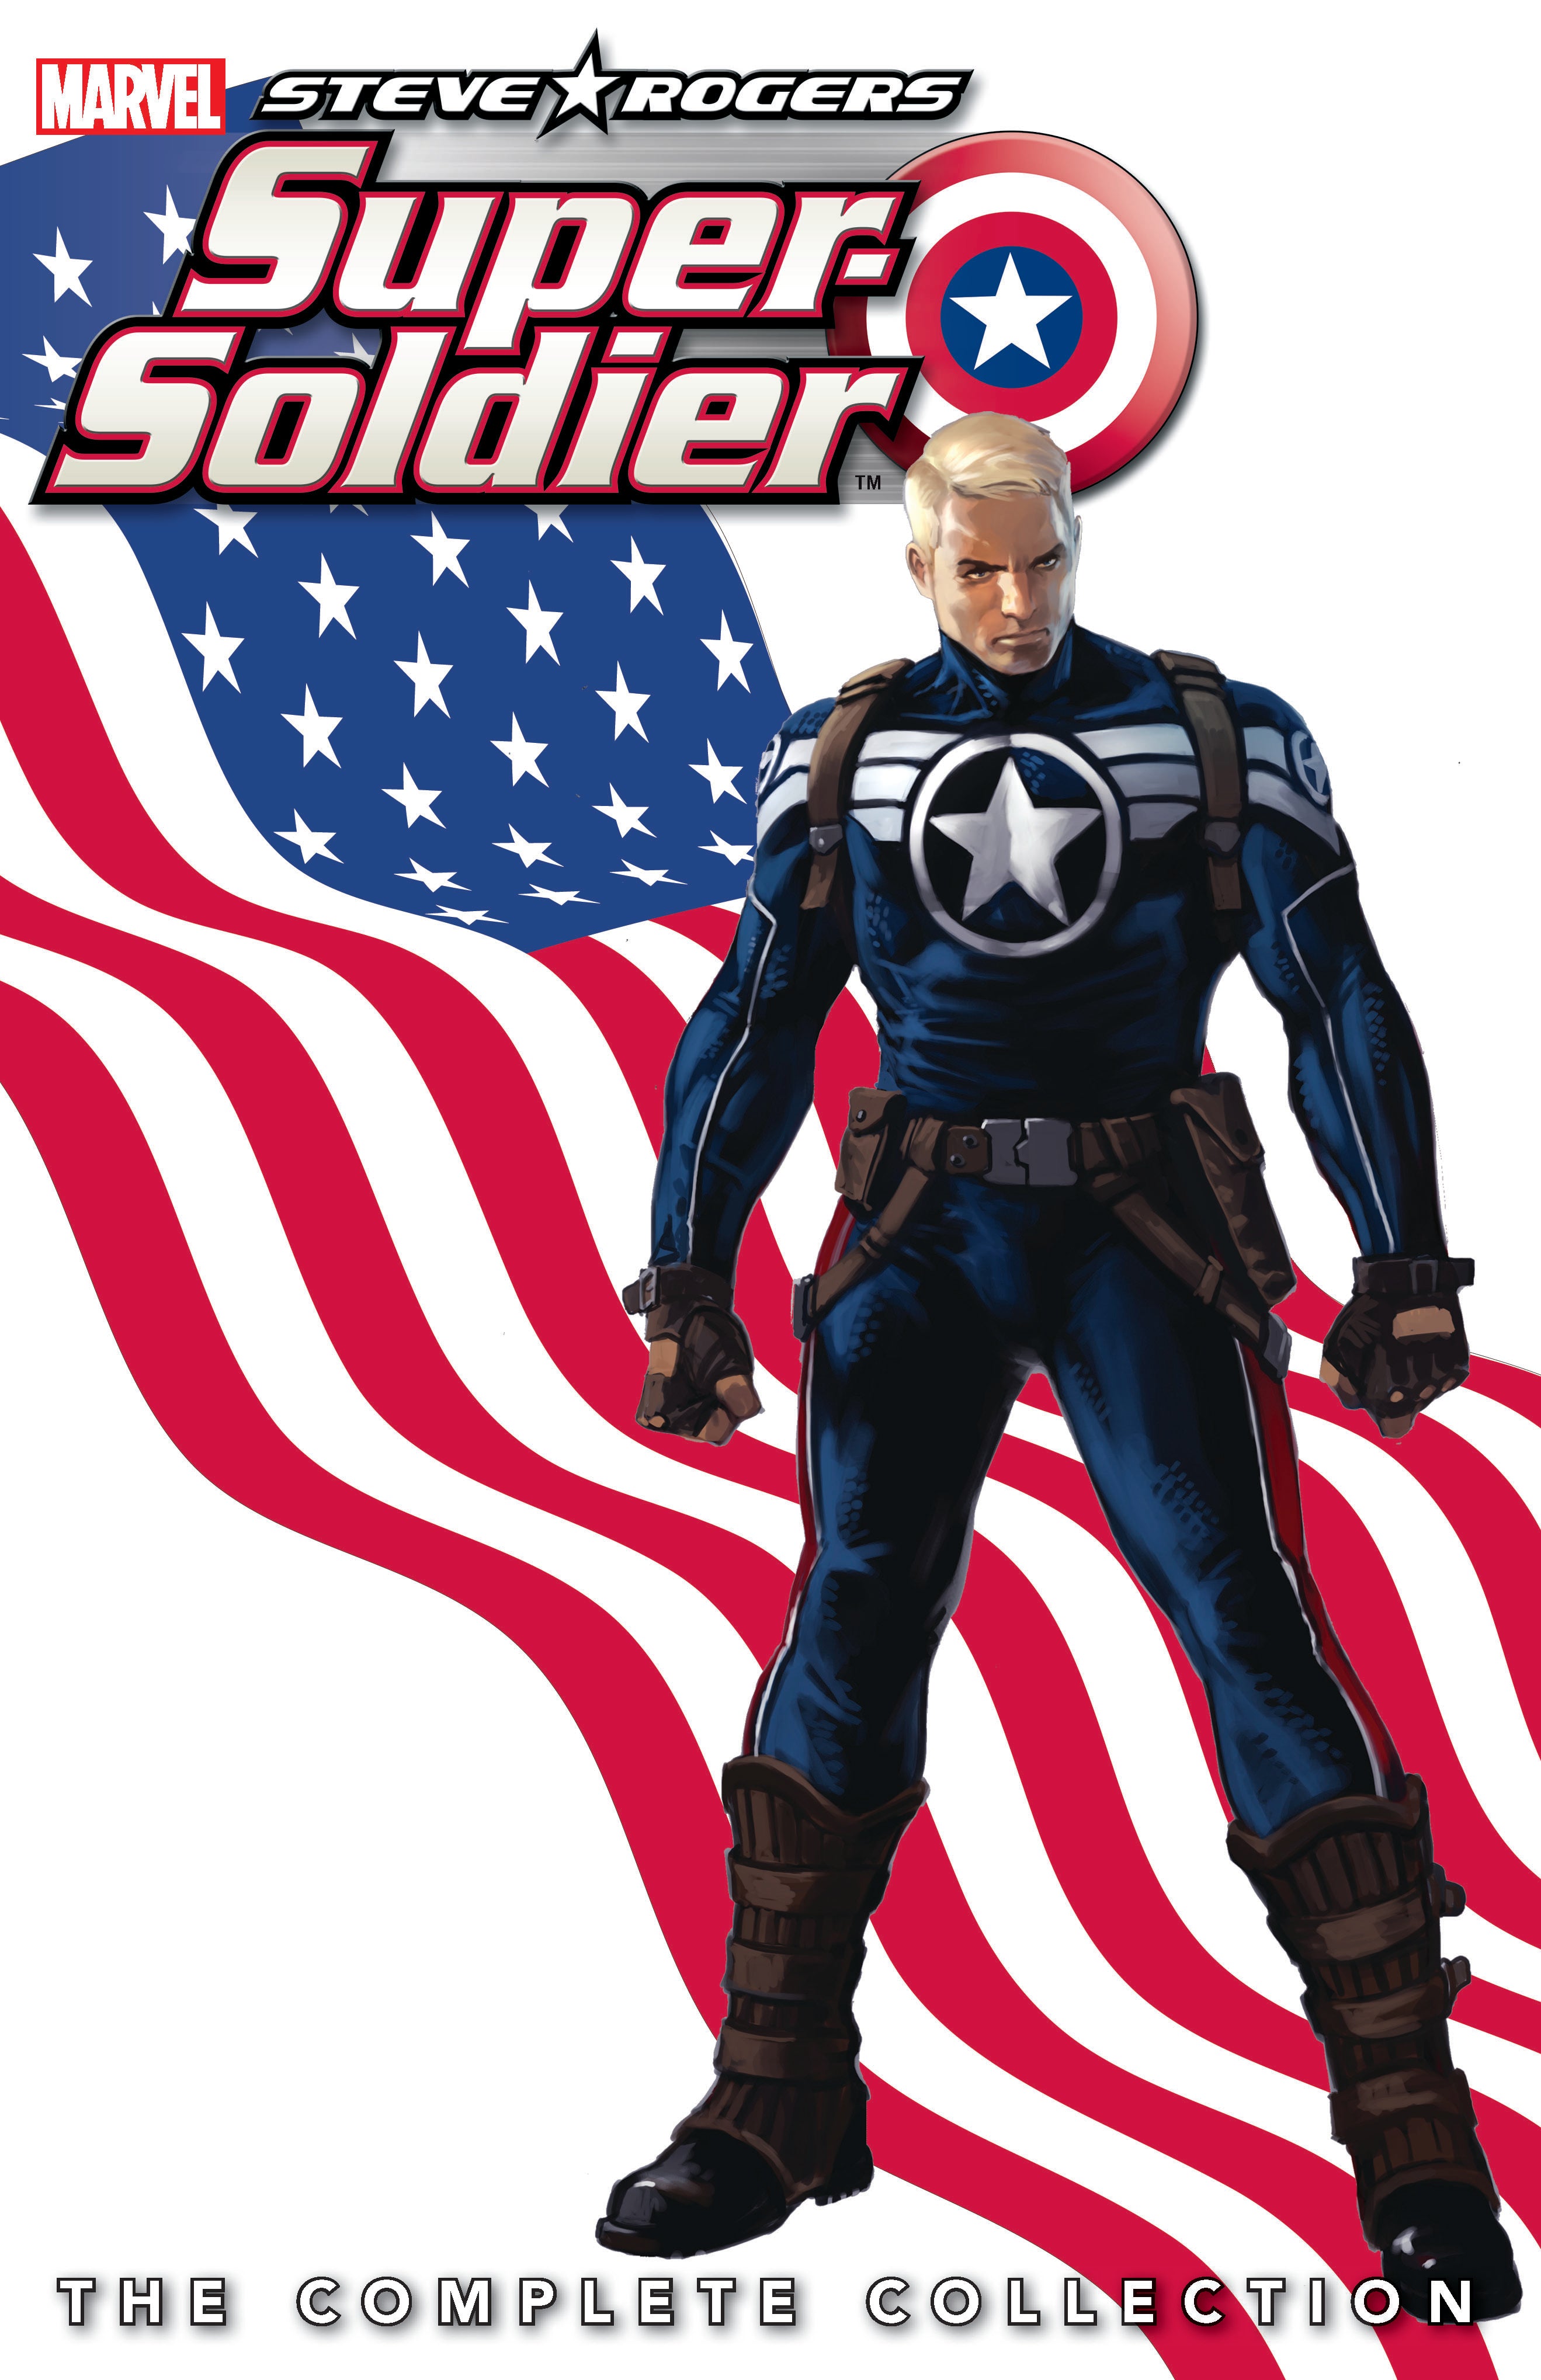 Steve Rogers Super-Soldier The Complete Collection - The Comic Warehouse